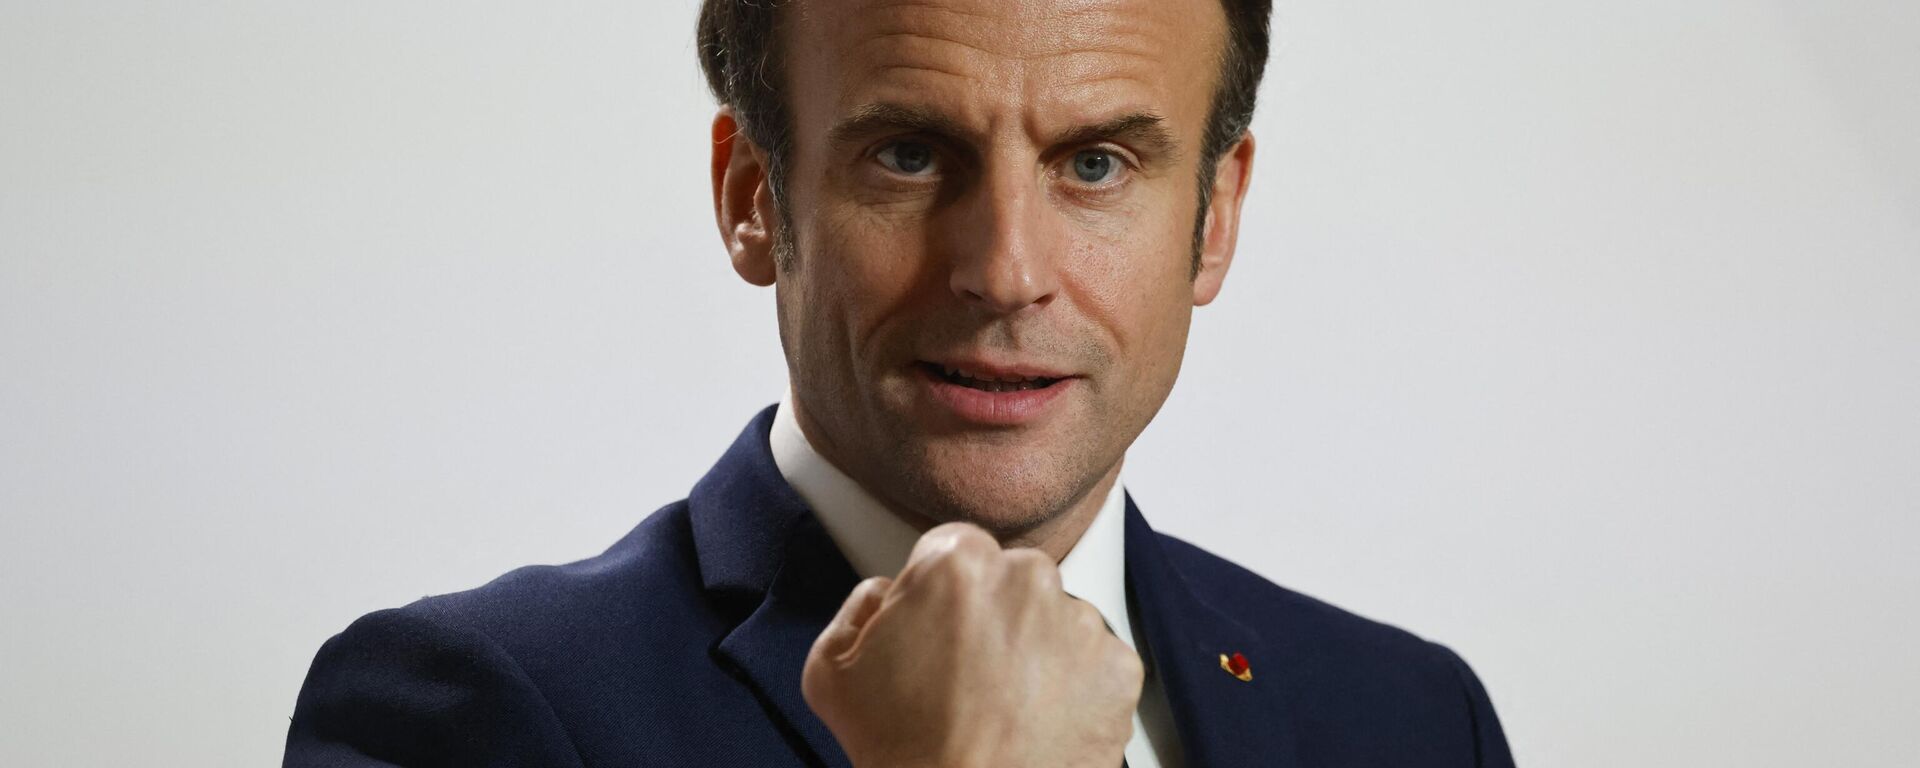 France's President Emmanuel Macron gestures as he talks to the press on the second day of a European Union (EU) summit at the EU Headquarters, in Brussels on March 25, 2022 - Sputnik International, 1920, 27.03.2022